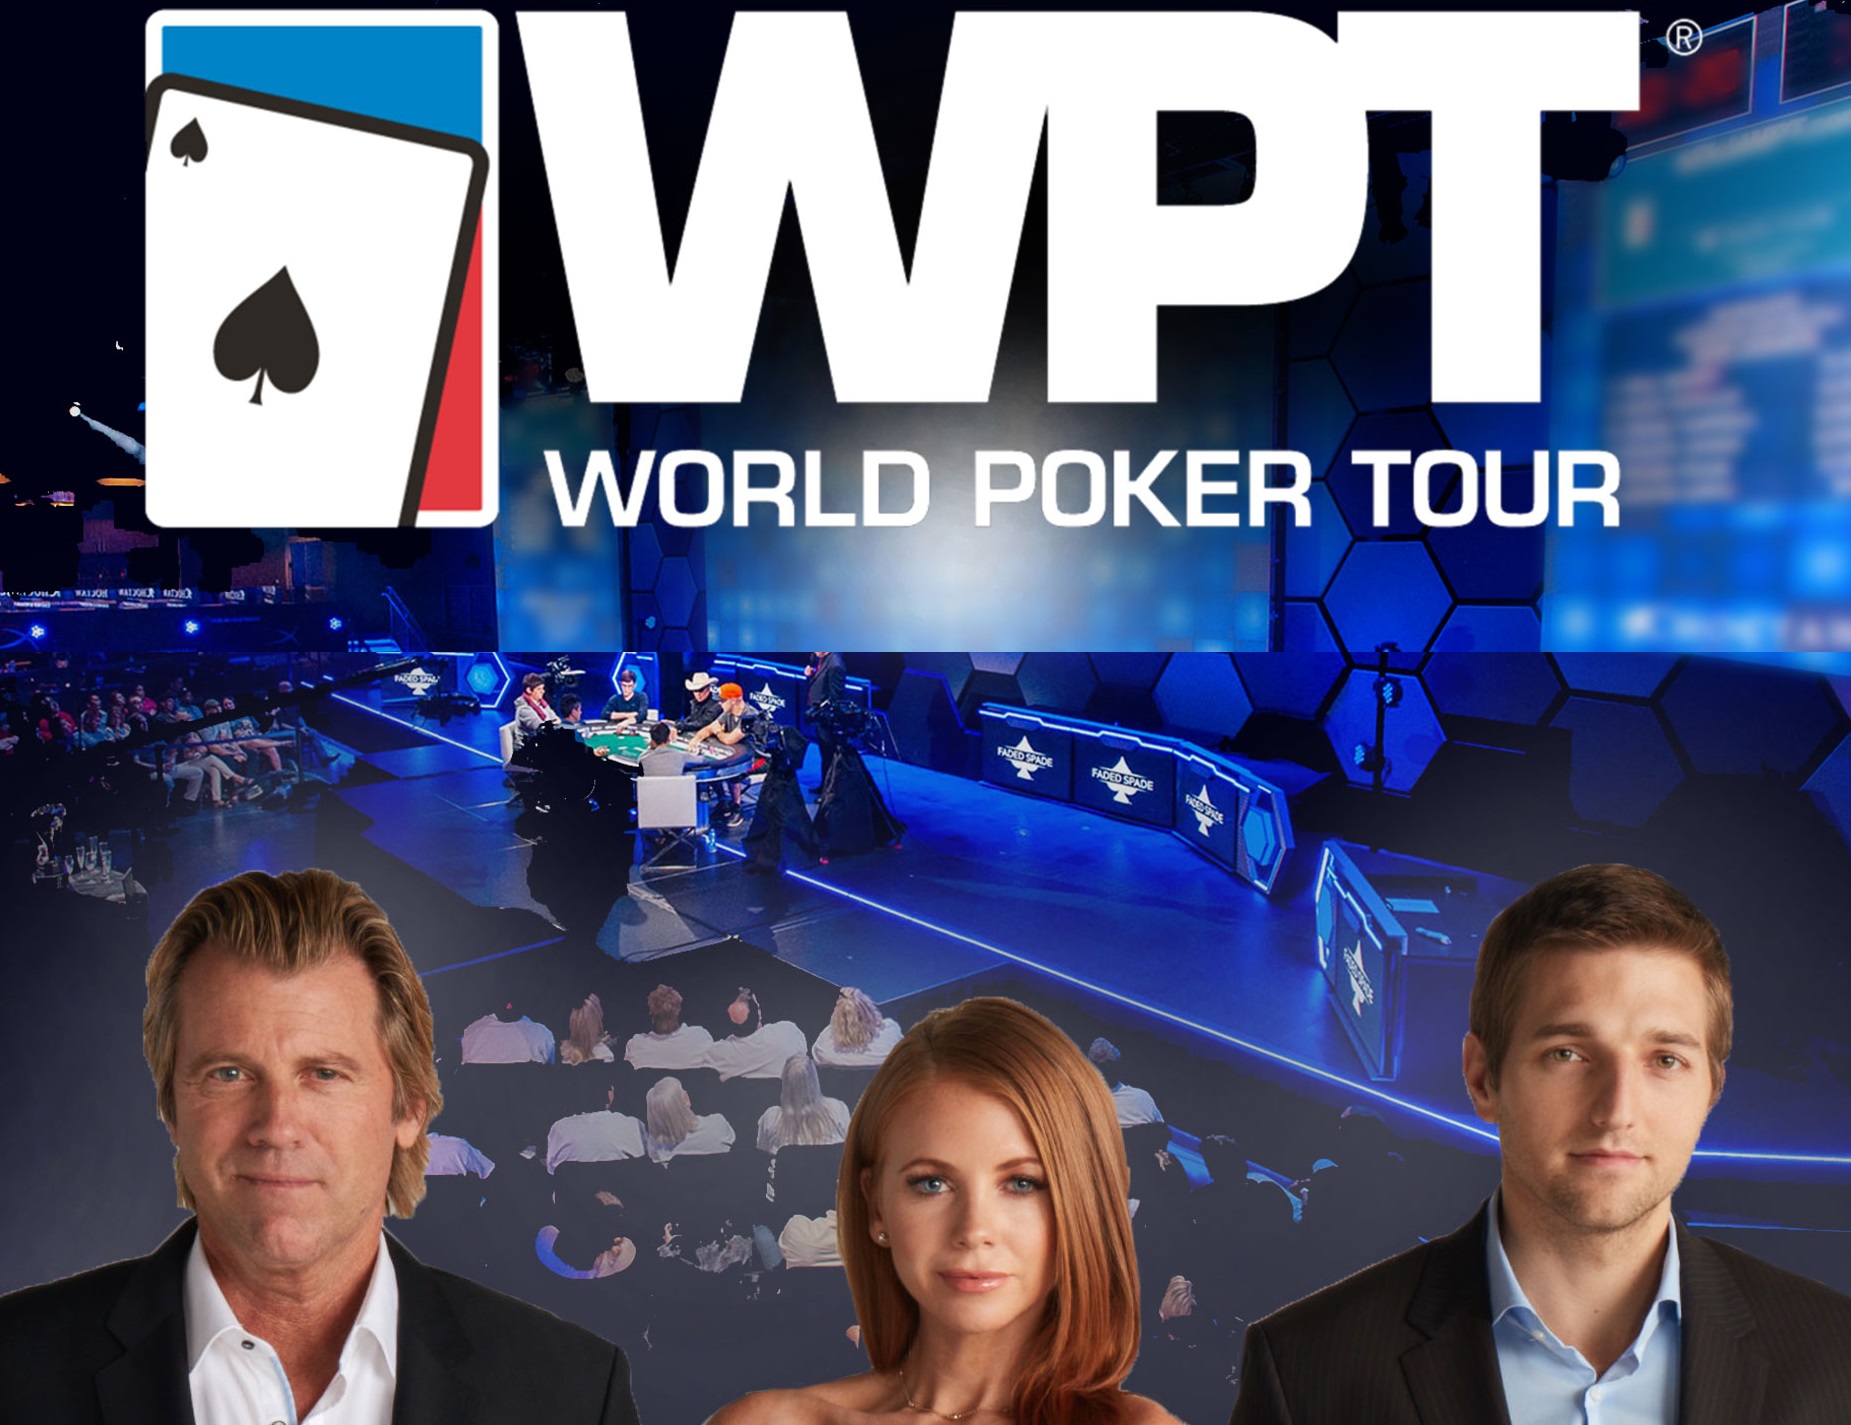 The WPT